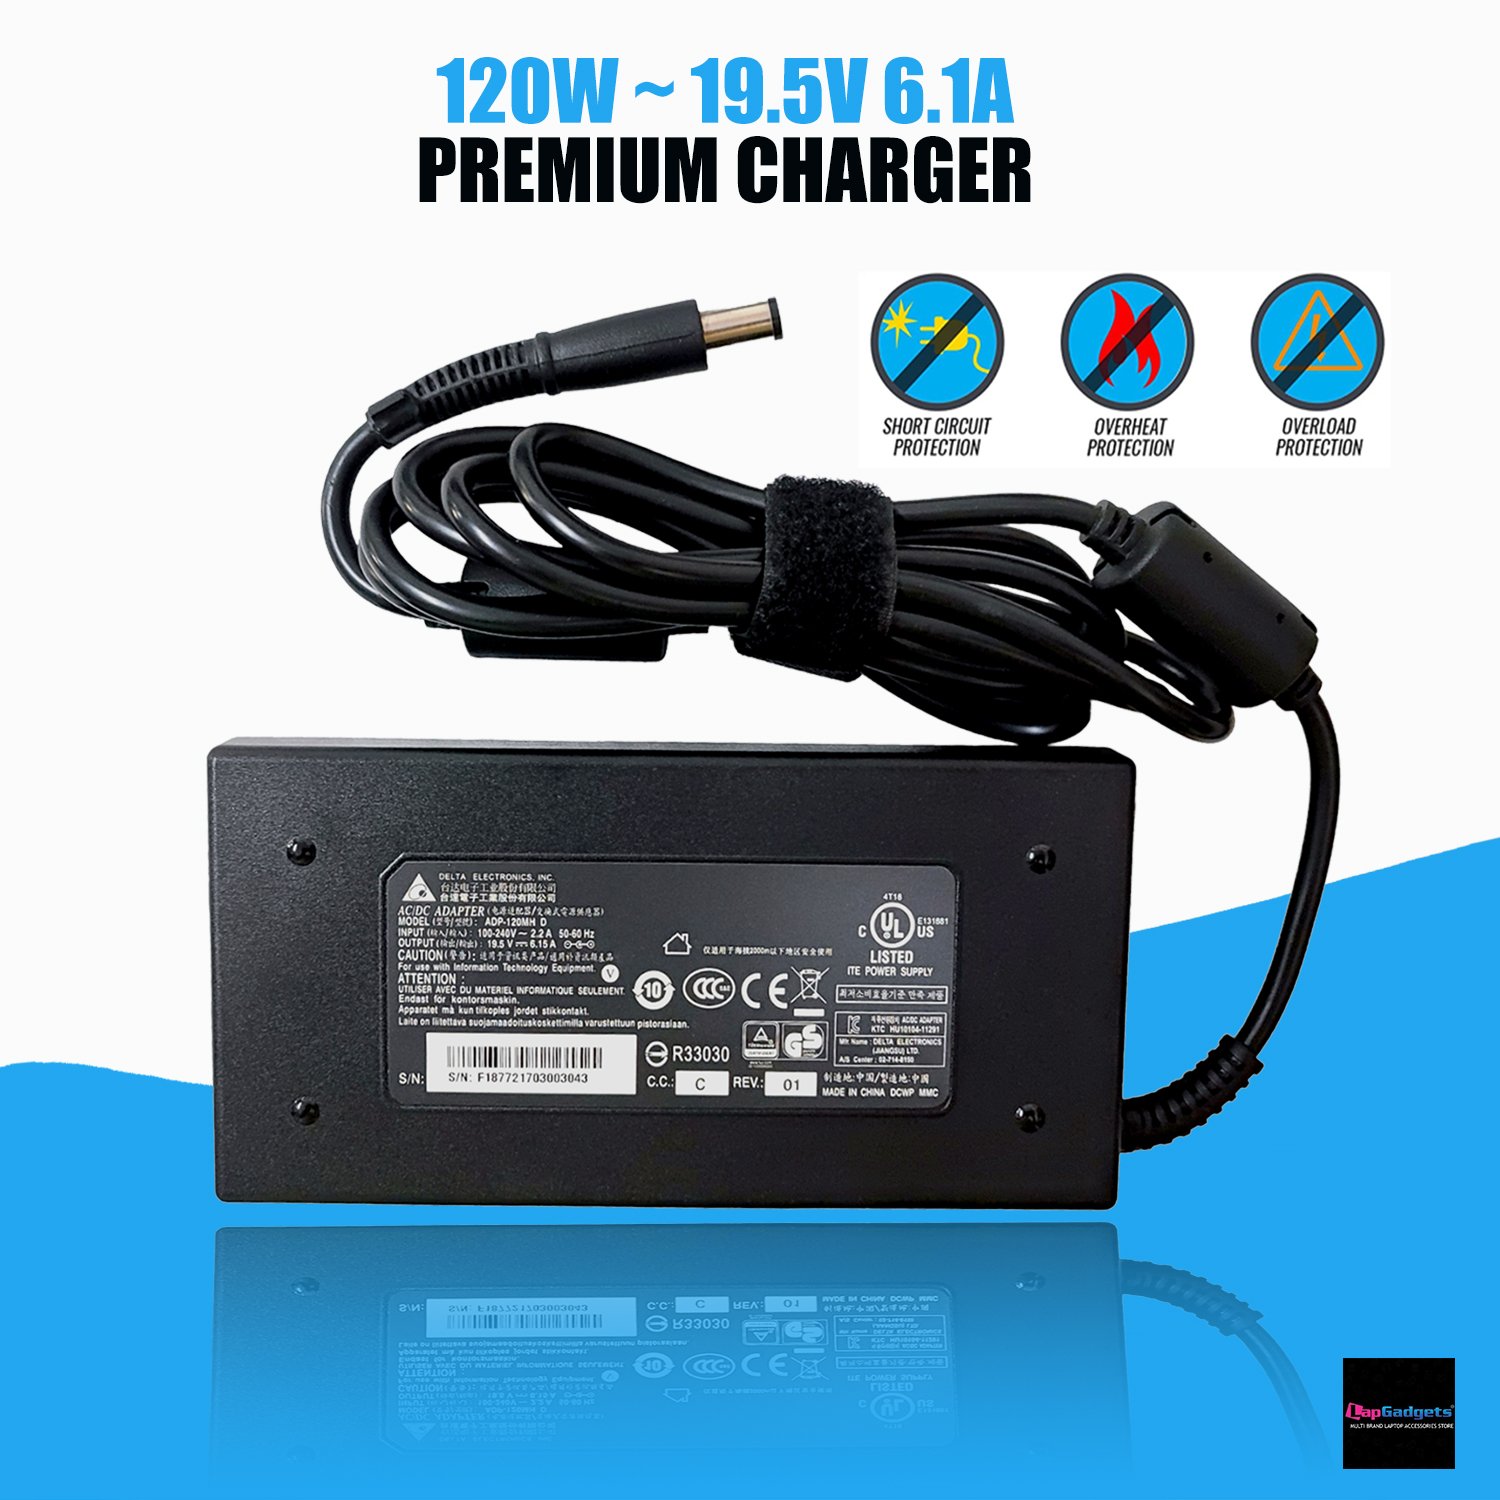 msi-120w-charger-7.4mm